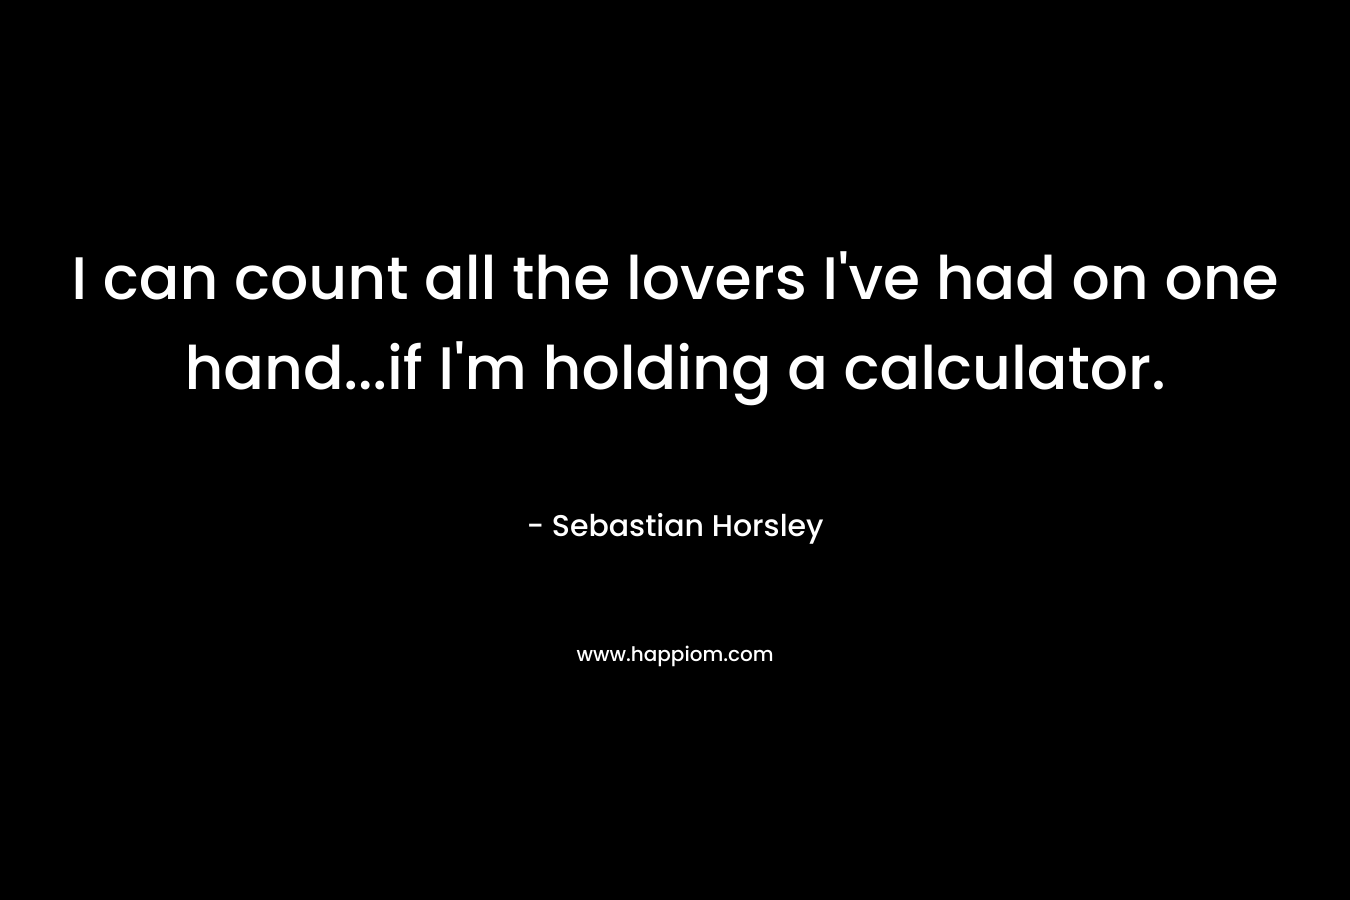 I can count all the lovers I’ve had on one hand…if I’m holding a calculator. – Sebastian Horsley